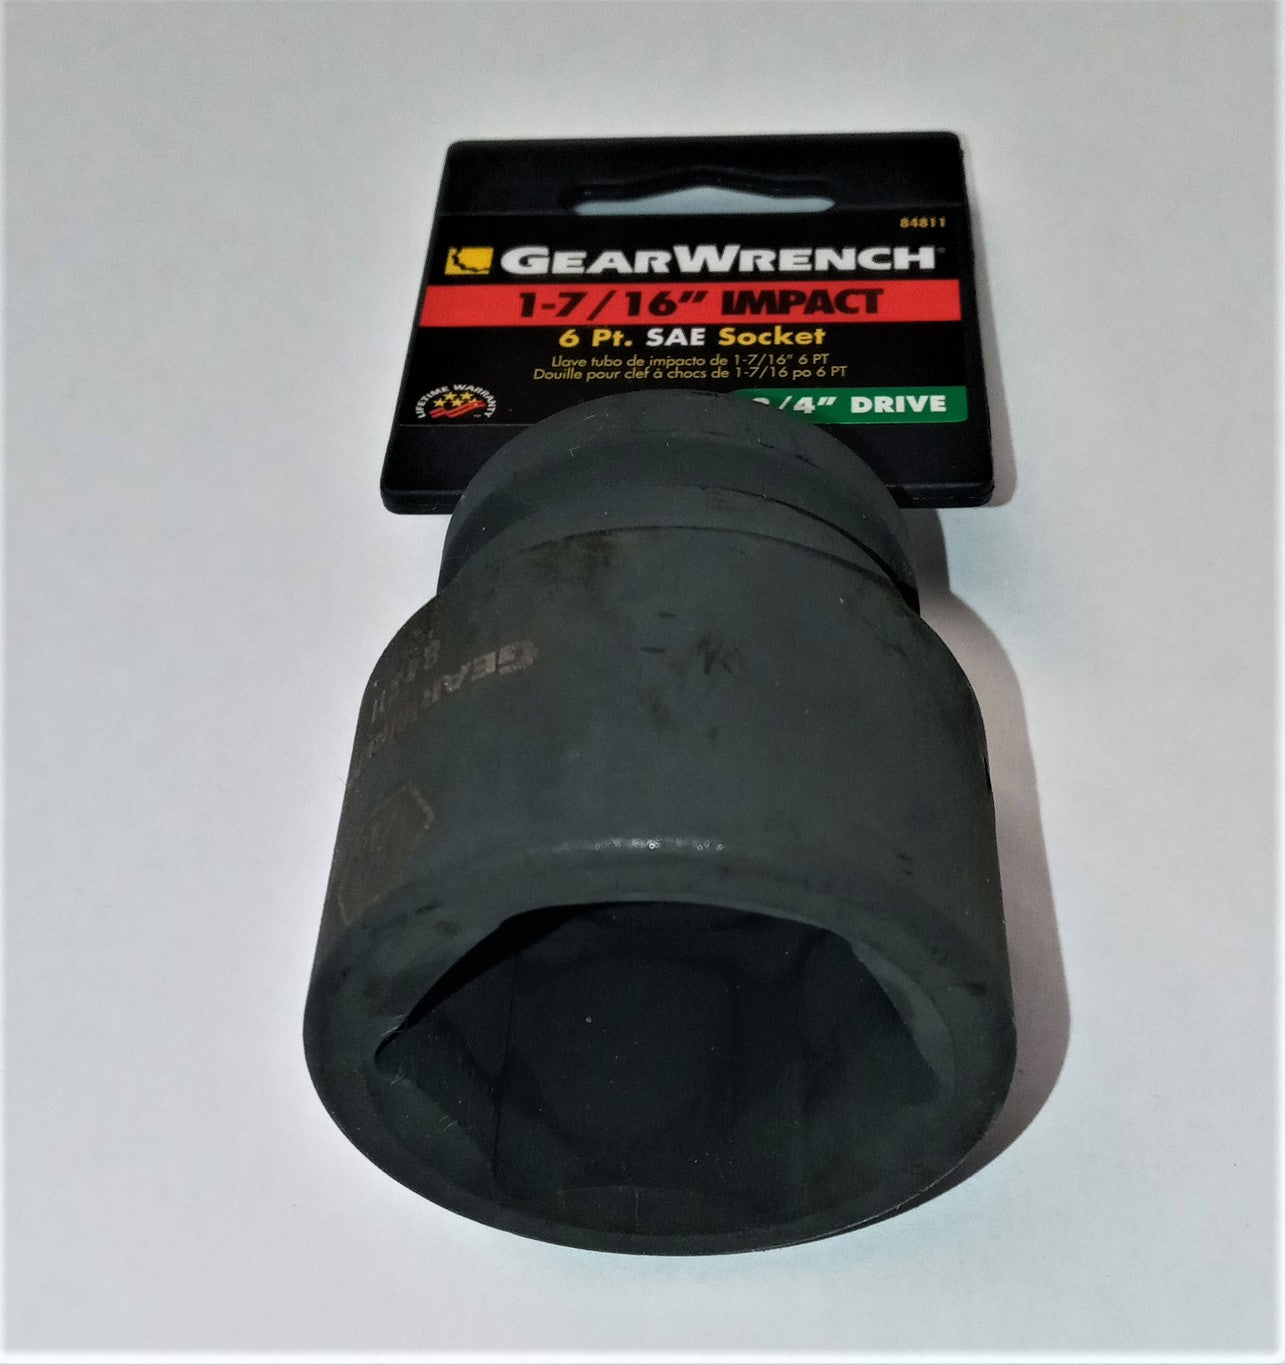 GearWrench 84811 3/4" Drive 1-7/16" 6 Point Standard Impact SAE Socket